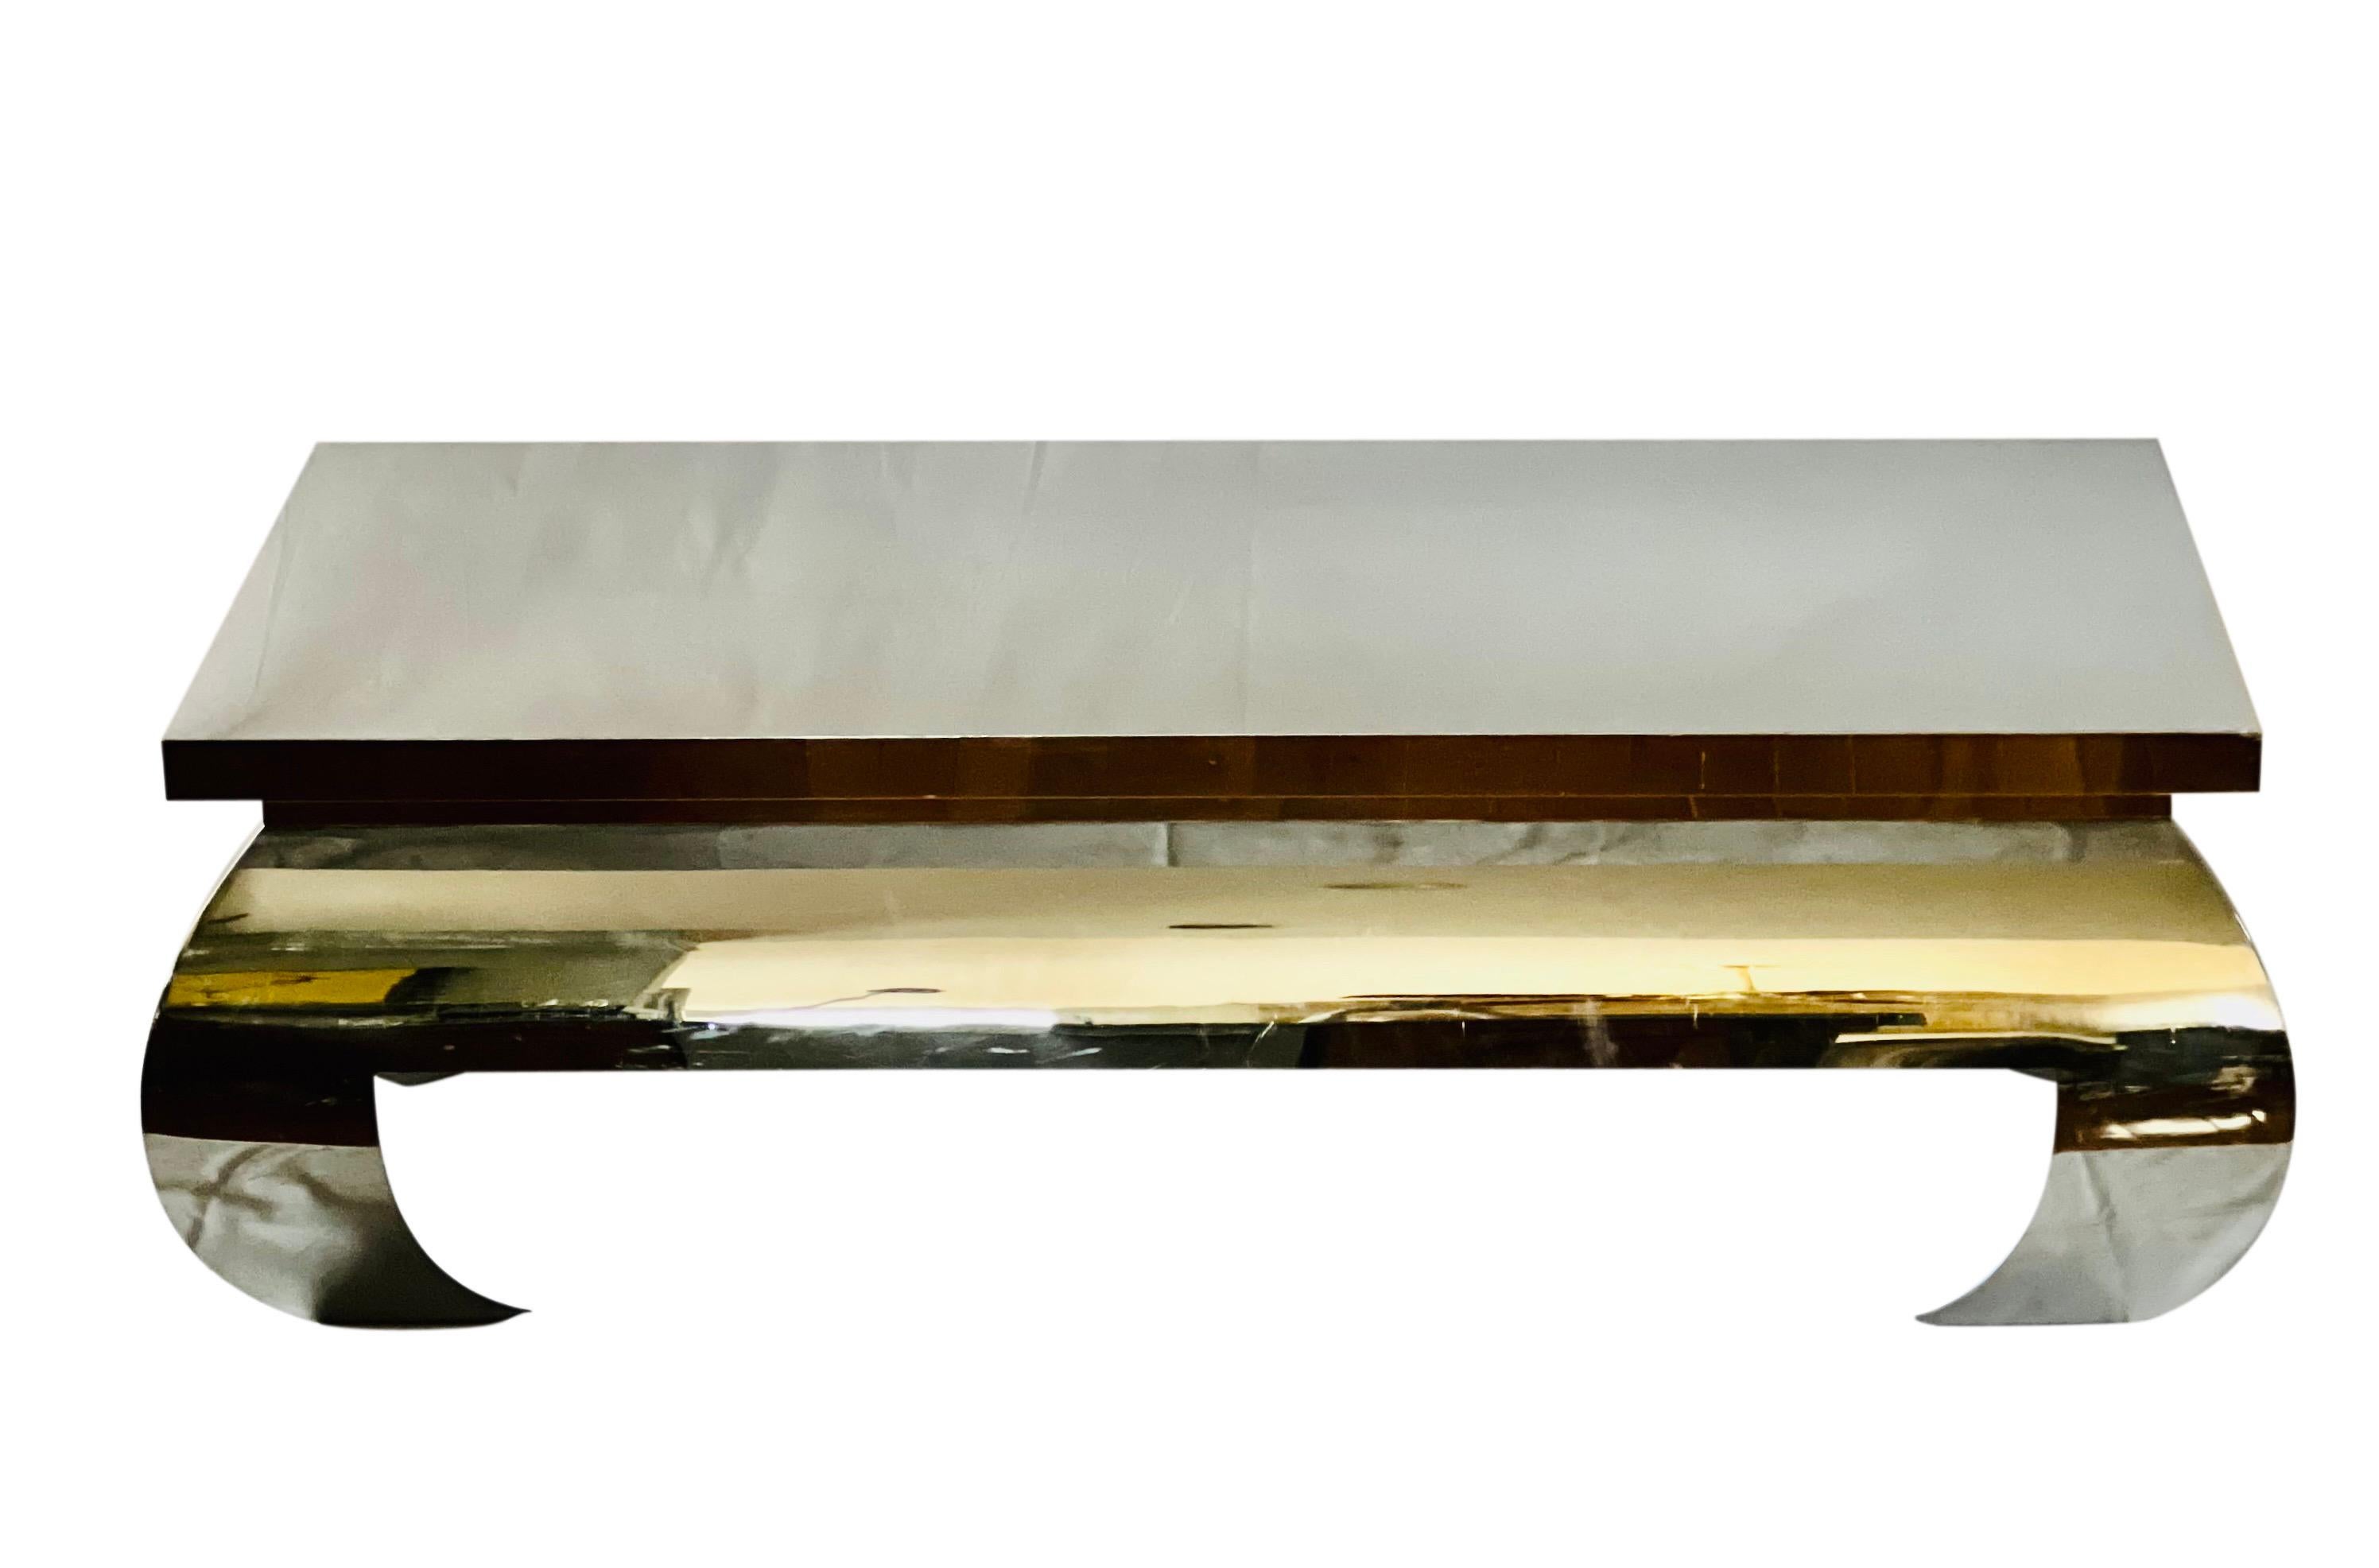 Gorgeous James Mont polished stainless steel coffee table.

This amazing table has a luminous presence with brilliant reflection from every angle accentuating its dramatic design. A stunning focal point for any room.